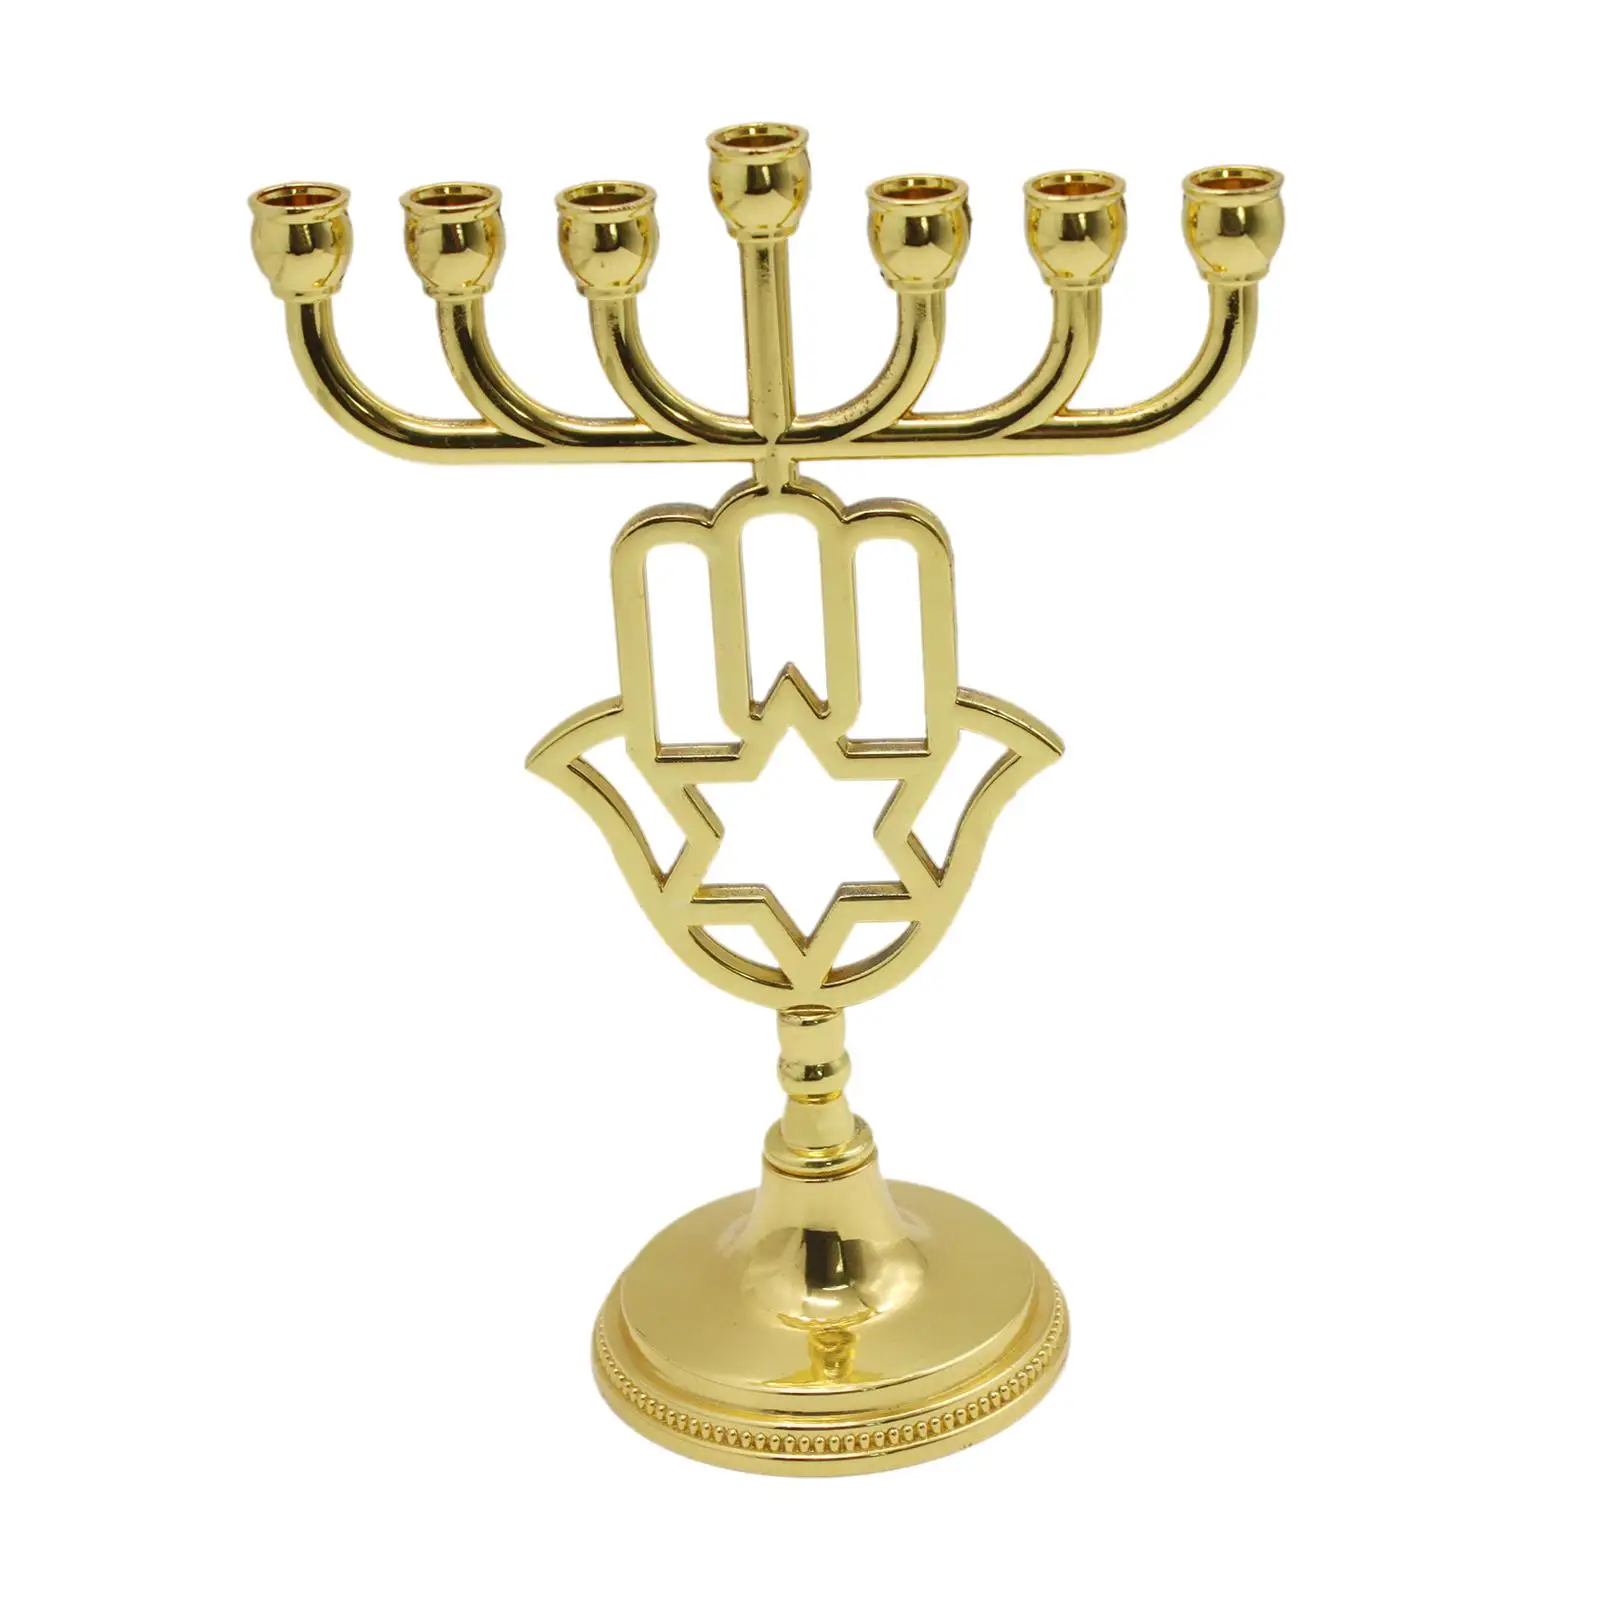 7 Branched Candle Holder Table Centerpieces Hanukkah Menorah Ornament Candle Stands for Party New Year Festival Event Decoration